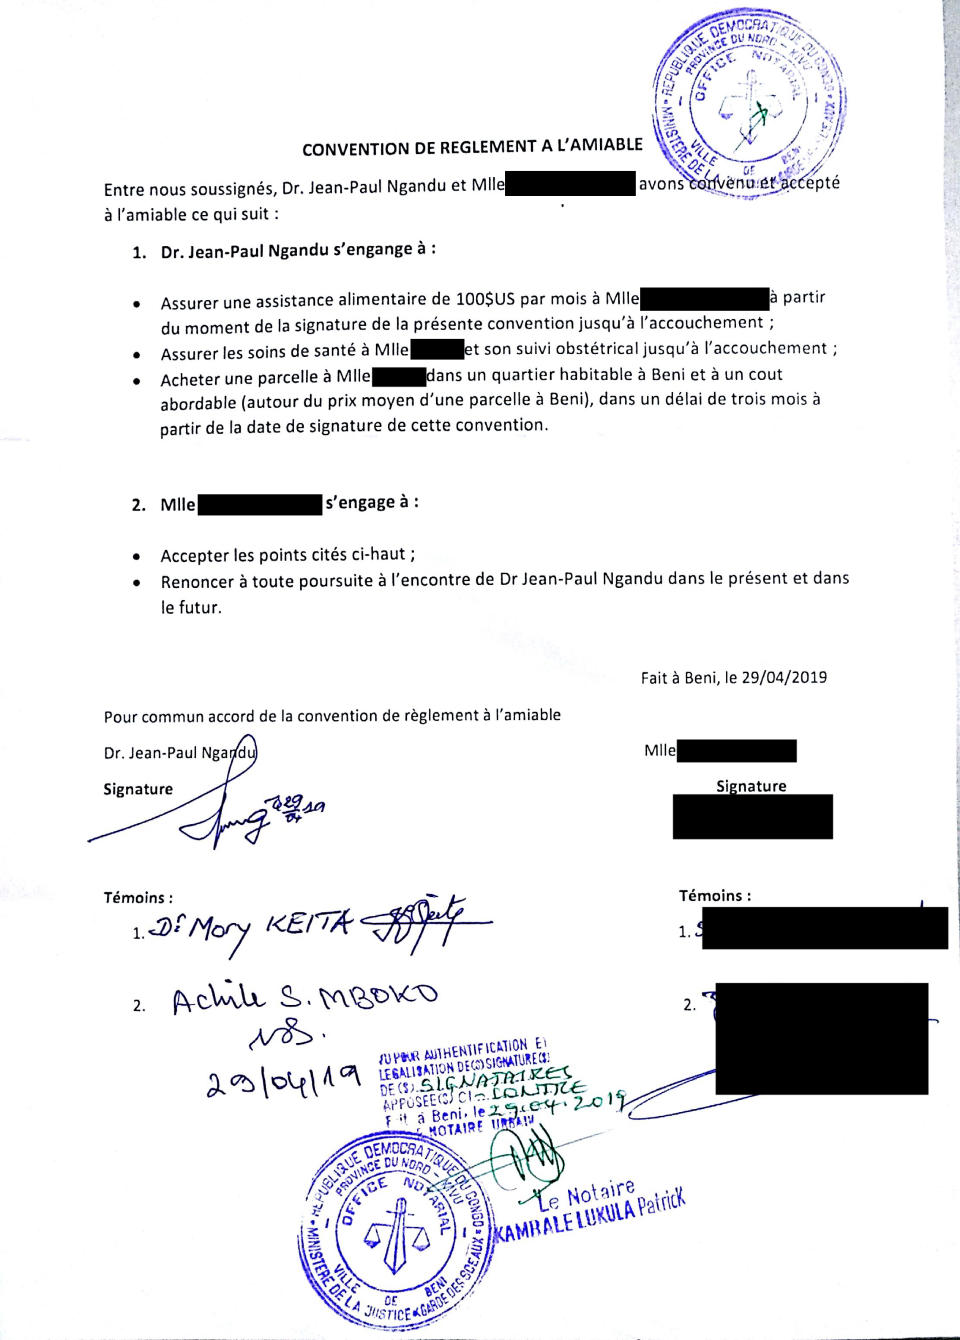 This image provided by Dr. Jean-Paul Ngandu shows an April 29, 2019 contract between him and a Congolese woman he allegedly impregnated. The notarized document contains the signatures of two World Health Organization staff members, including a manager, as witnesses to the agreement. Ngandu promised to pay her a monthly stipend, cover the woman's pregnancy-related health costs and to buy her a plot of land. The deal was made “to protect the integrity and reputation of the organization," said Ngandu, who headed the WHO infection control team in Beni. The names of the woman and two other witnesses have been redacted to protect their privacy. (Courtesy Dr. Jean-Paul Ngandu via AP)